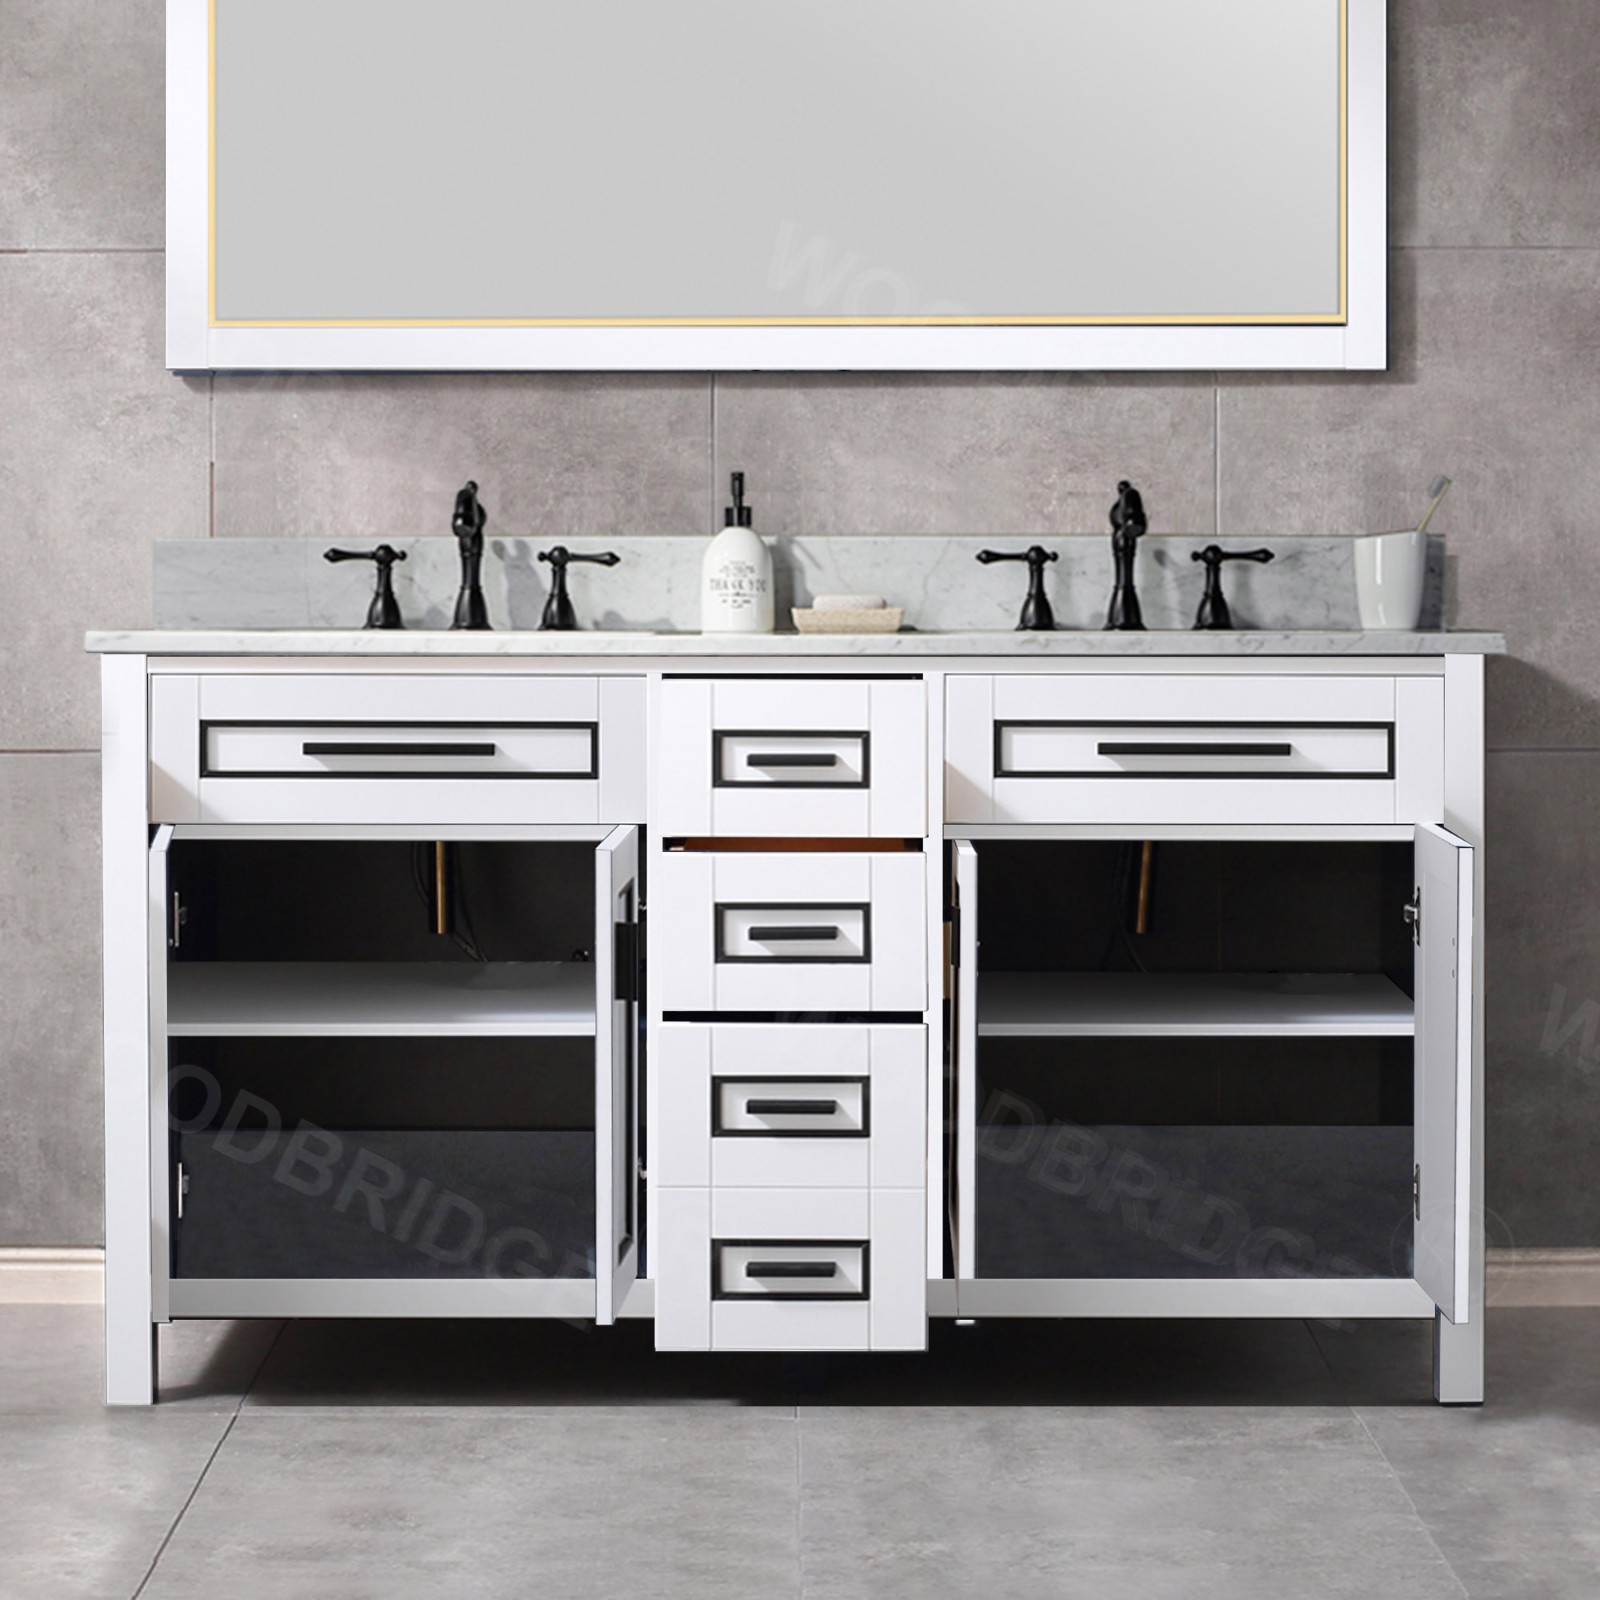  WOODBRIDGE Milan  61” Floor Mounted Single Basin Vanity Set with Solid Wood Cabinet in White, and Carrara White Marble Vanity Top with Pre-installed Undermount Rectangle Bathroom Sink in White, Pre-Drilled 3-Hole for 4-inch Centerset Faucet_4616